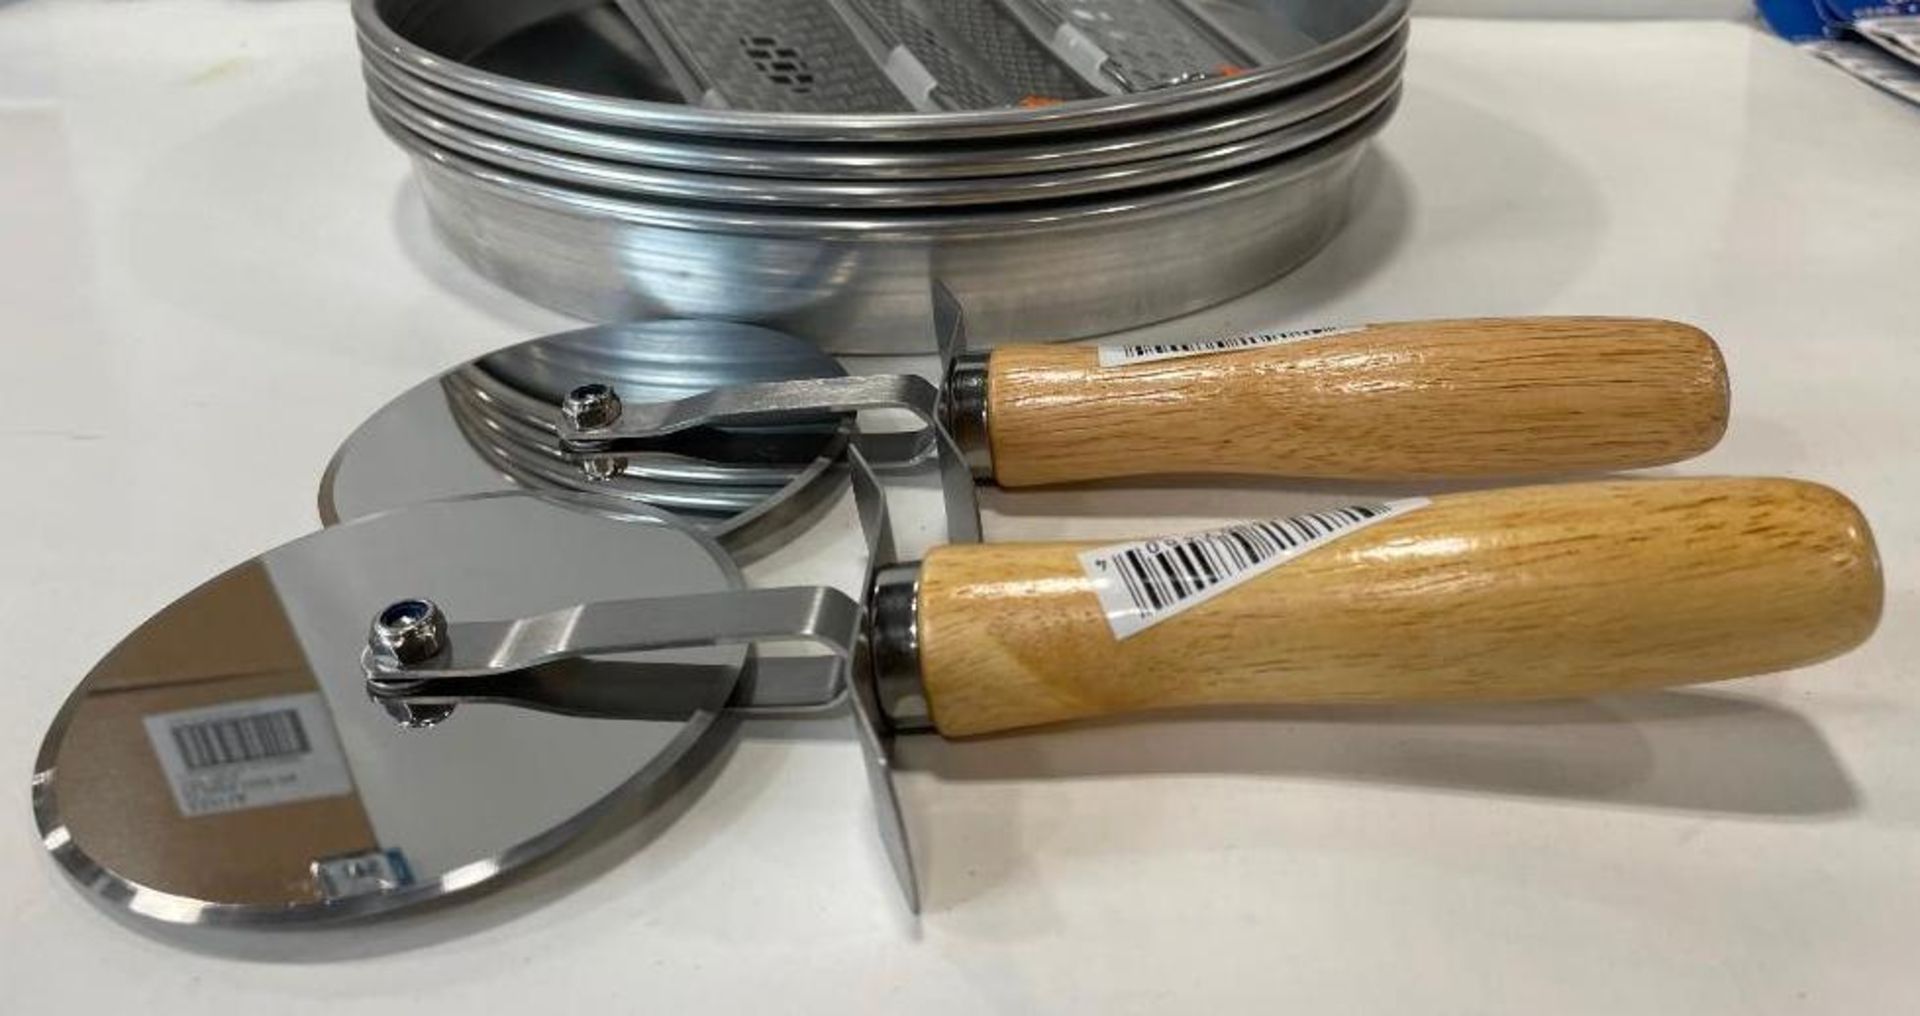 11" PIZZA PAN SET INCLUDING: (4) 15" PIZZA PANS, (2) PIZZA CUTTERS & (3) GRATERS - Image 5 of 9